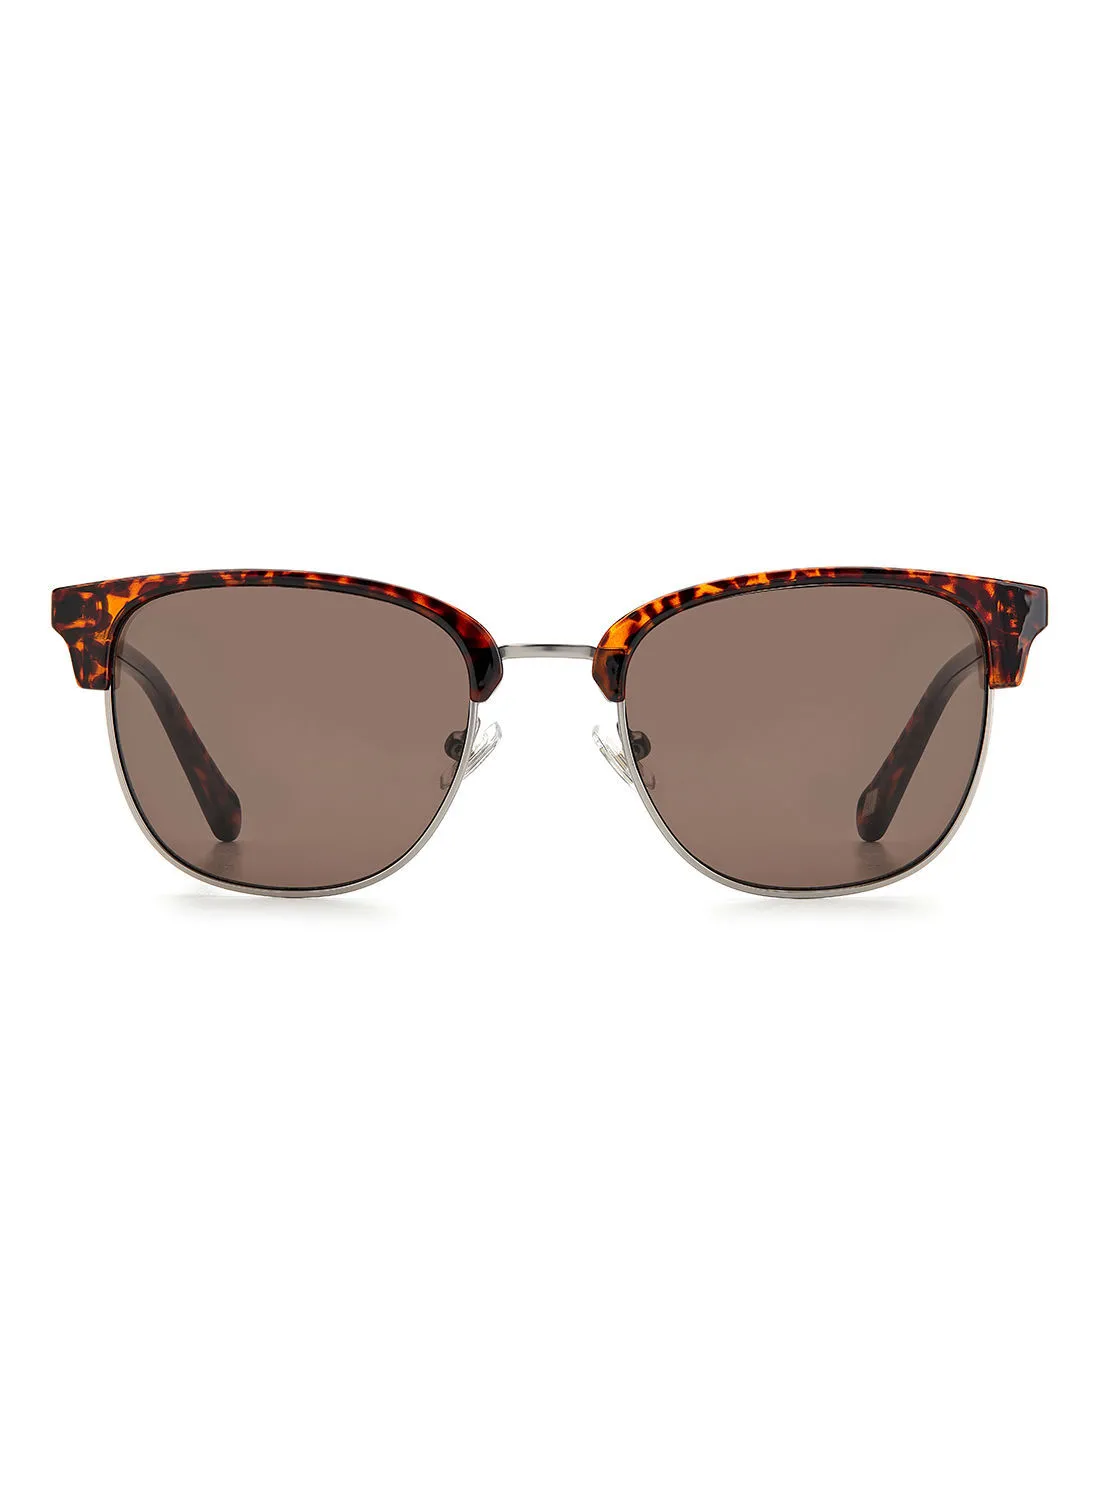 FOSSIL Square  Sunglasses FOS 2113/G/S  HVN 51